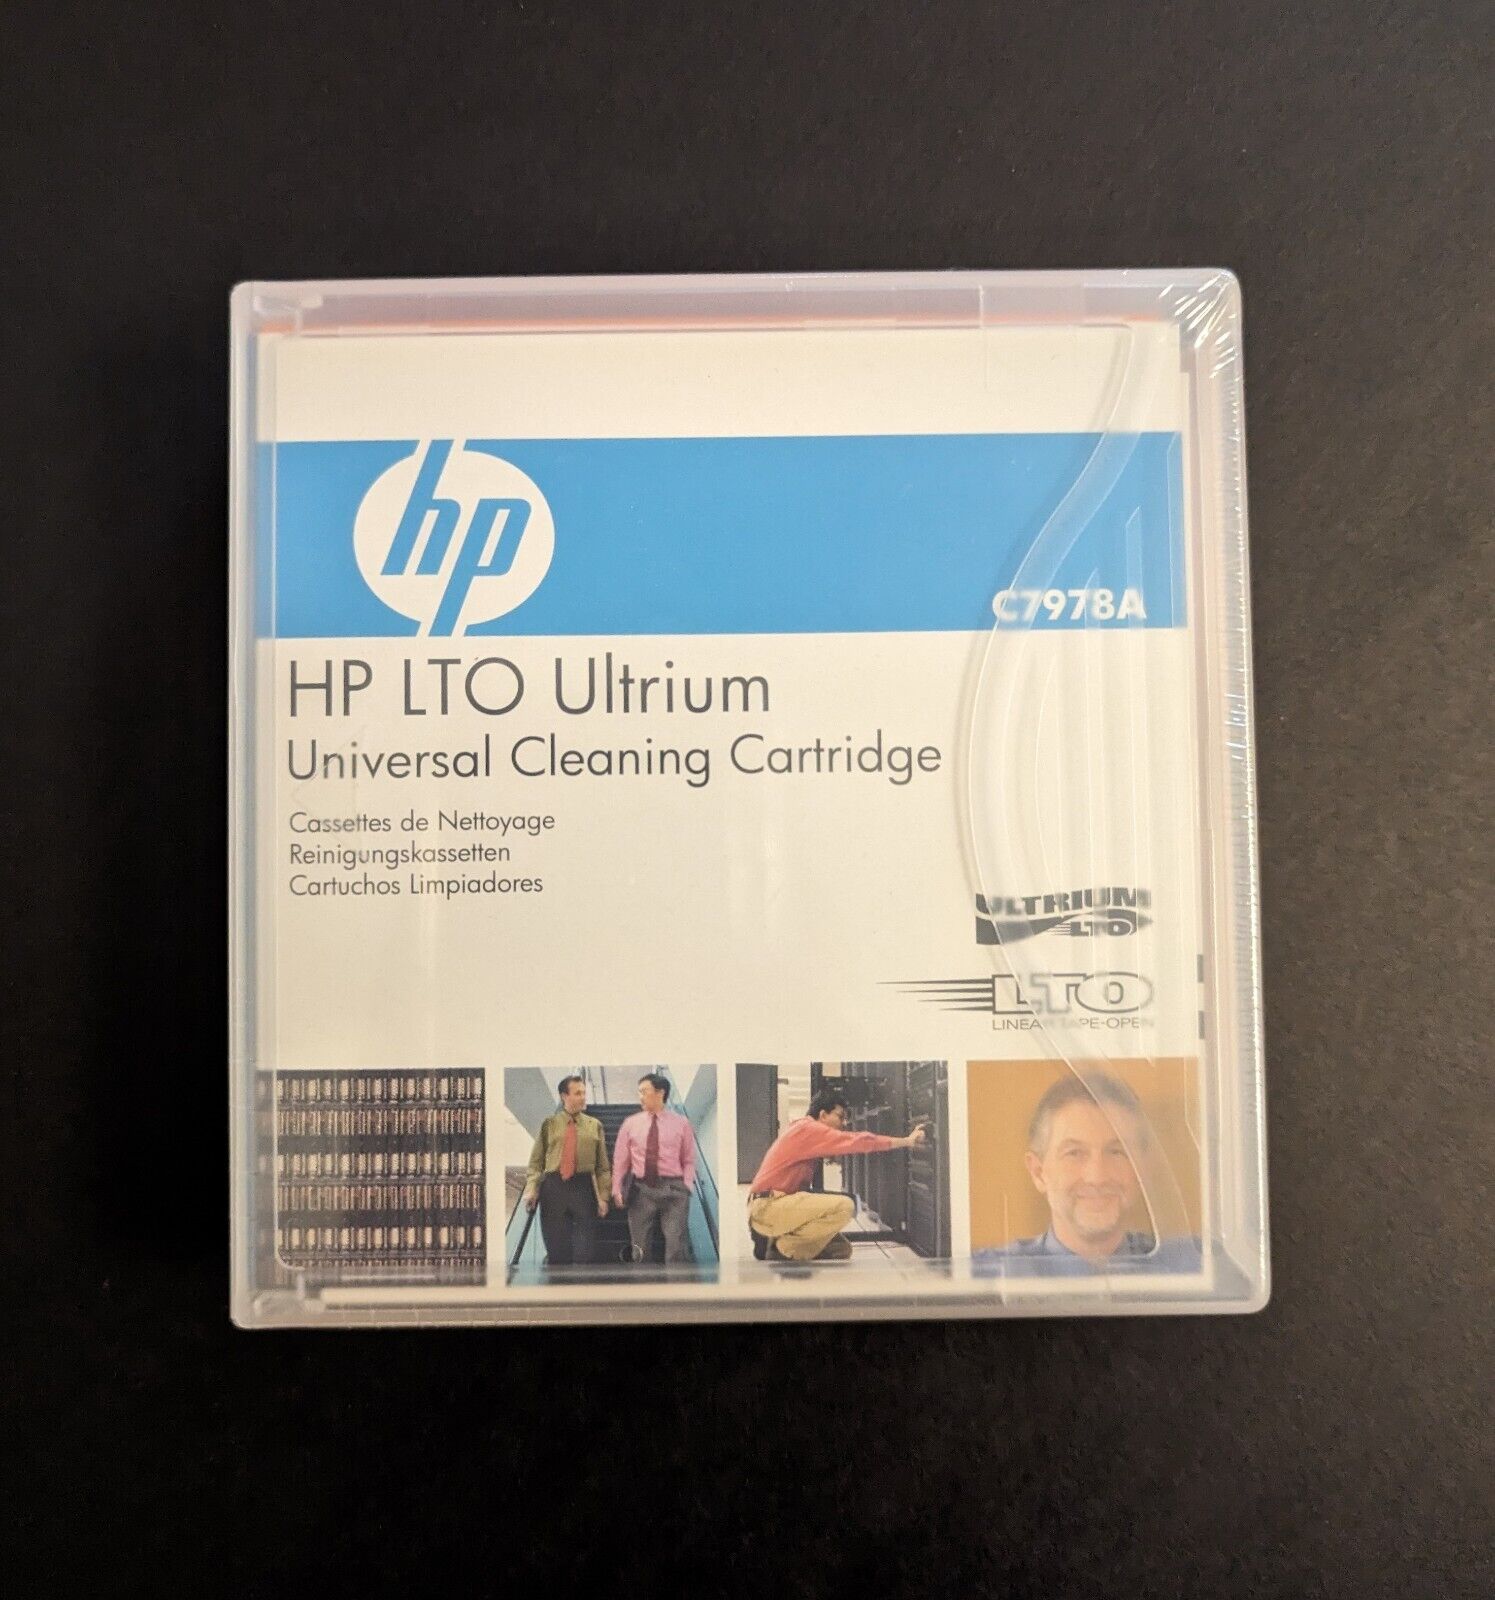 HP C7978A Cleaning Ultrium LTO Universal Cartridge Cleaner For Ultrium 1,2,3,4